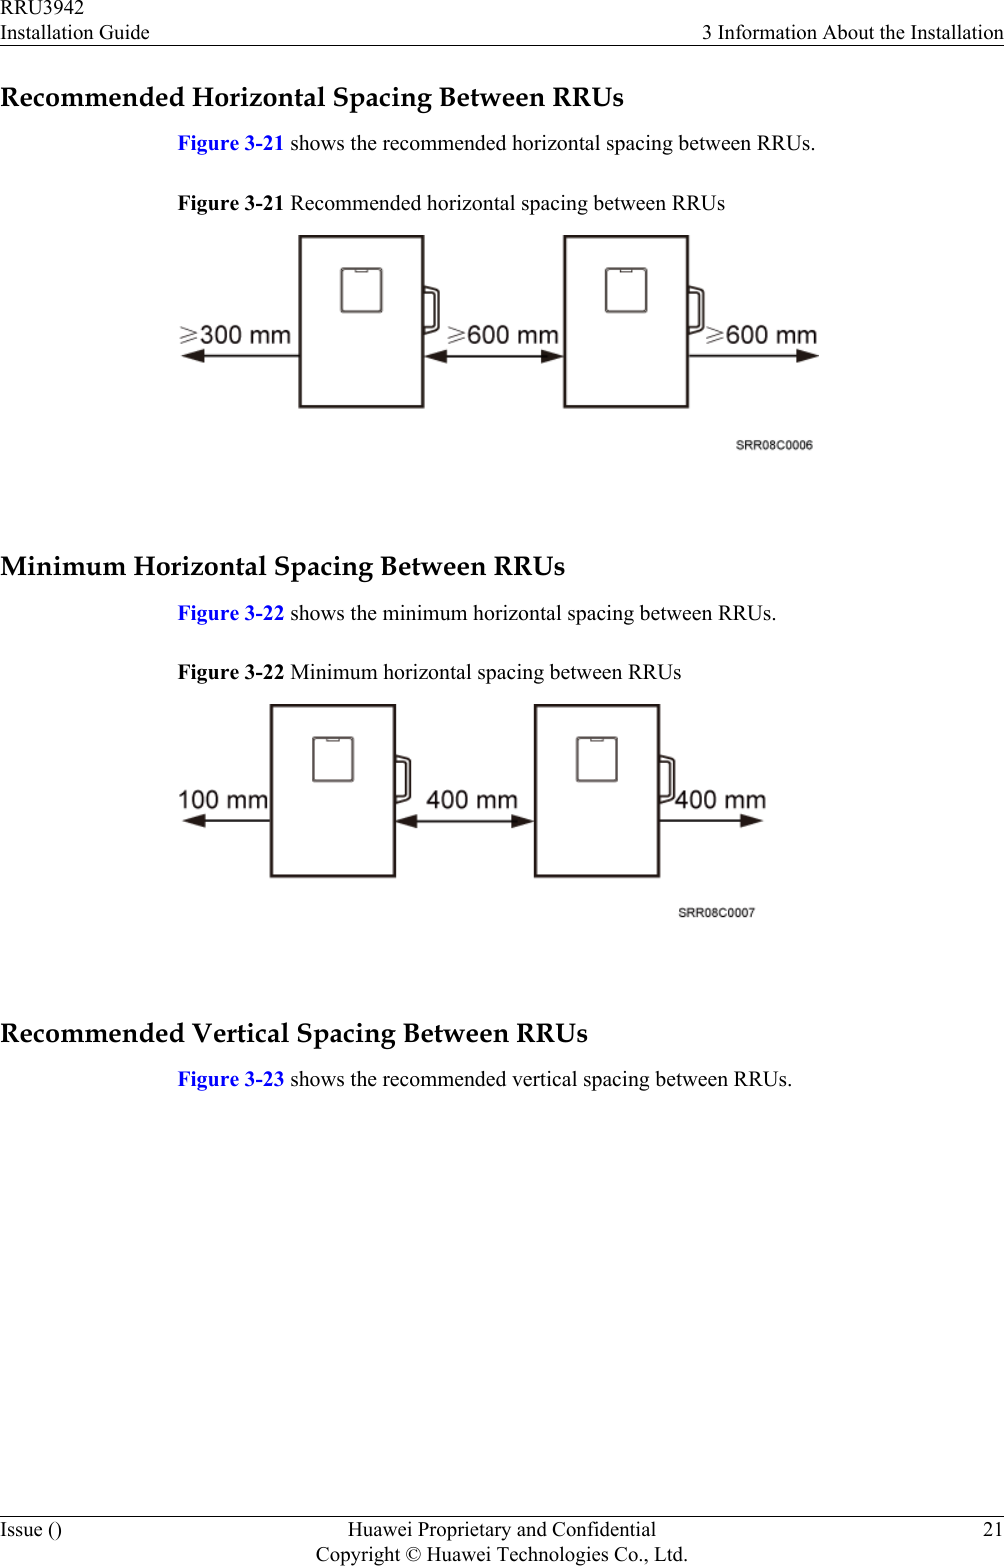 Recommended Horizontal Spacing Between RRUsFigure 3-21 shows the recommended horizontal spacing between RRUs.Figure 3-21 Recommended horizontal spacing between RRUs Minimum Horizontal Spacing Between RRUsFigure 3-22 shows the minimum horizontal spacing between RRUs.Figure 3-22 Minimum horizontal spacing between RRUs Recommended Vertical Spacing Between RRUsFigure 3-23 shows the recommended vertical spacing between RRUs.RRU3942Installation Guide 3 Information About the InstallationIssue () Huawei Proprietary and ConfidentialCopyright © Huawei Technologies Co., Ltd.21